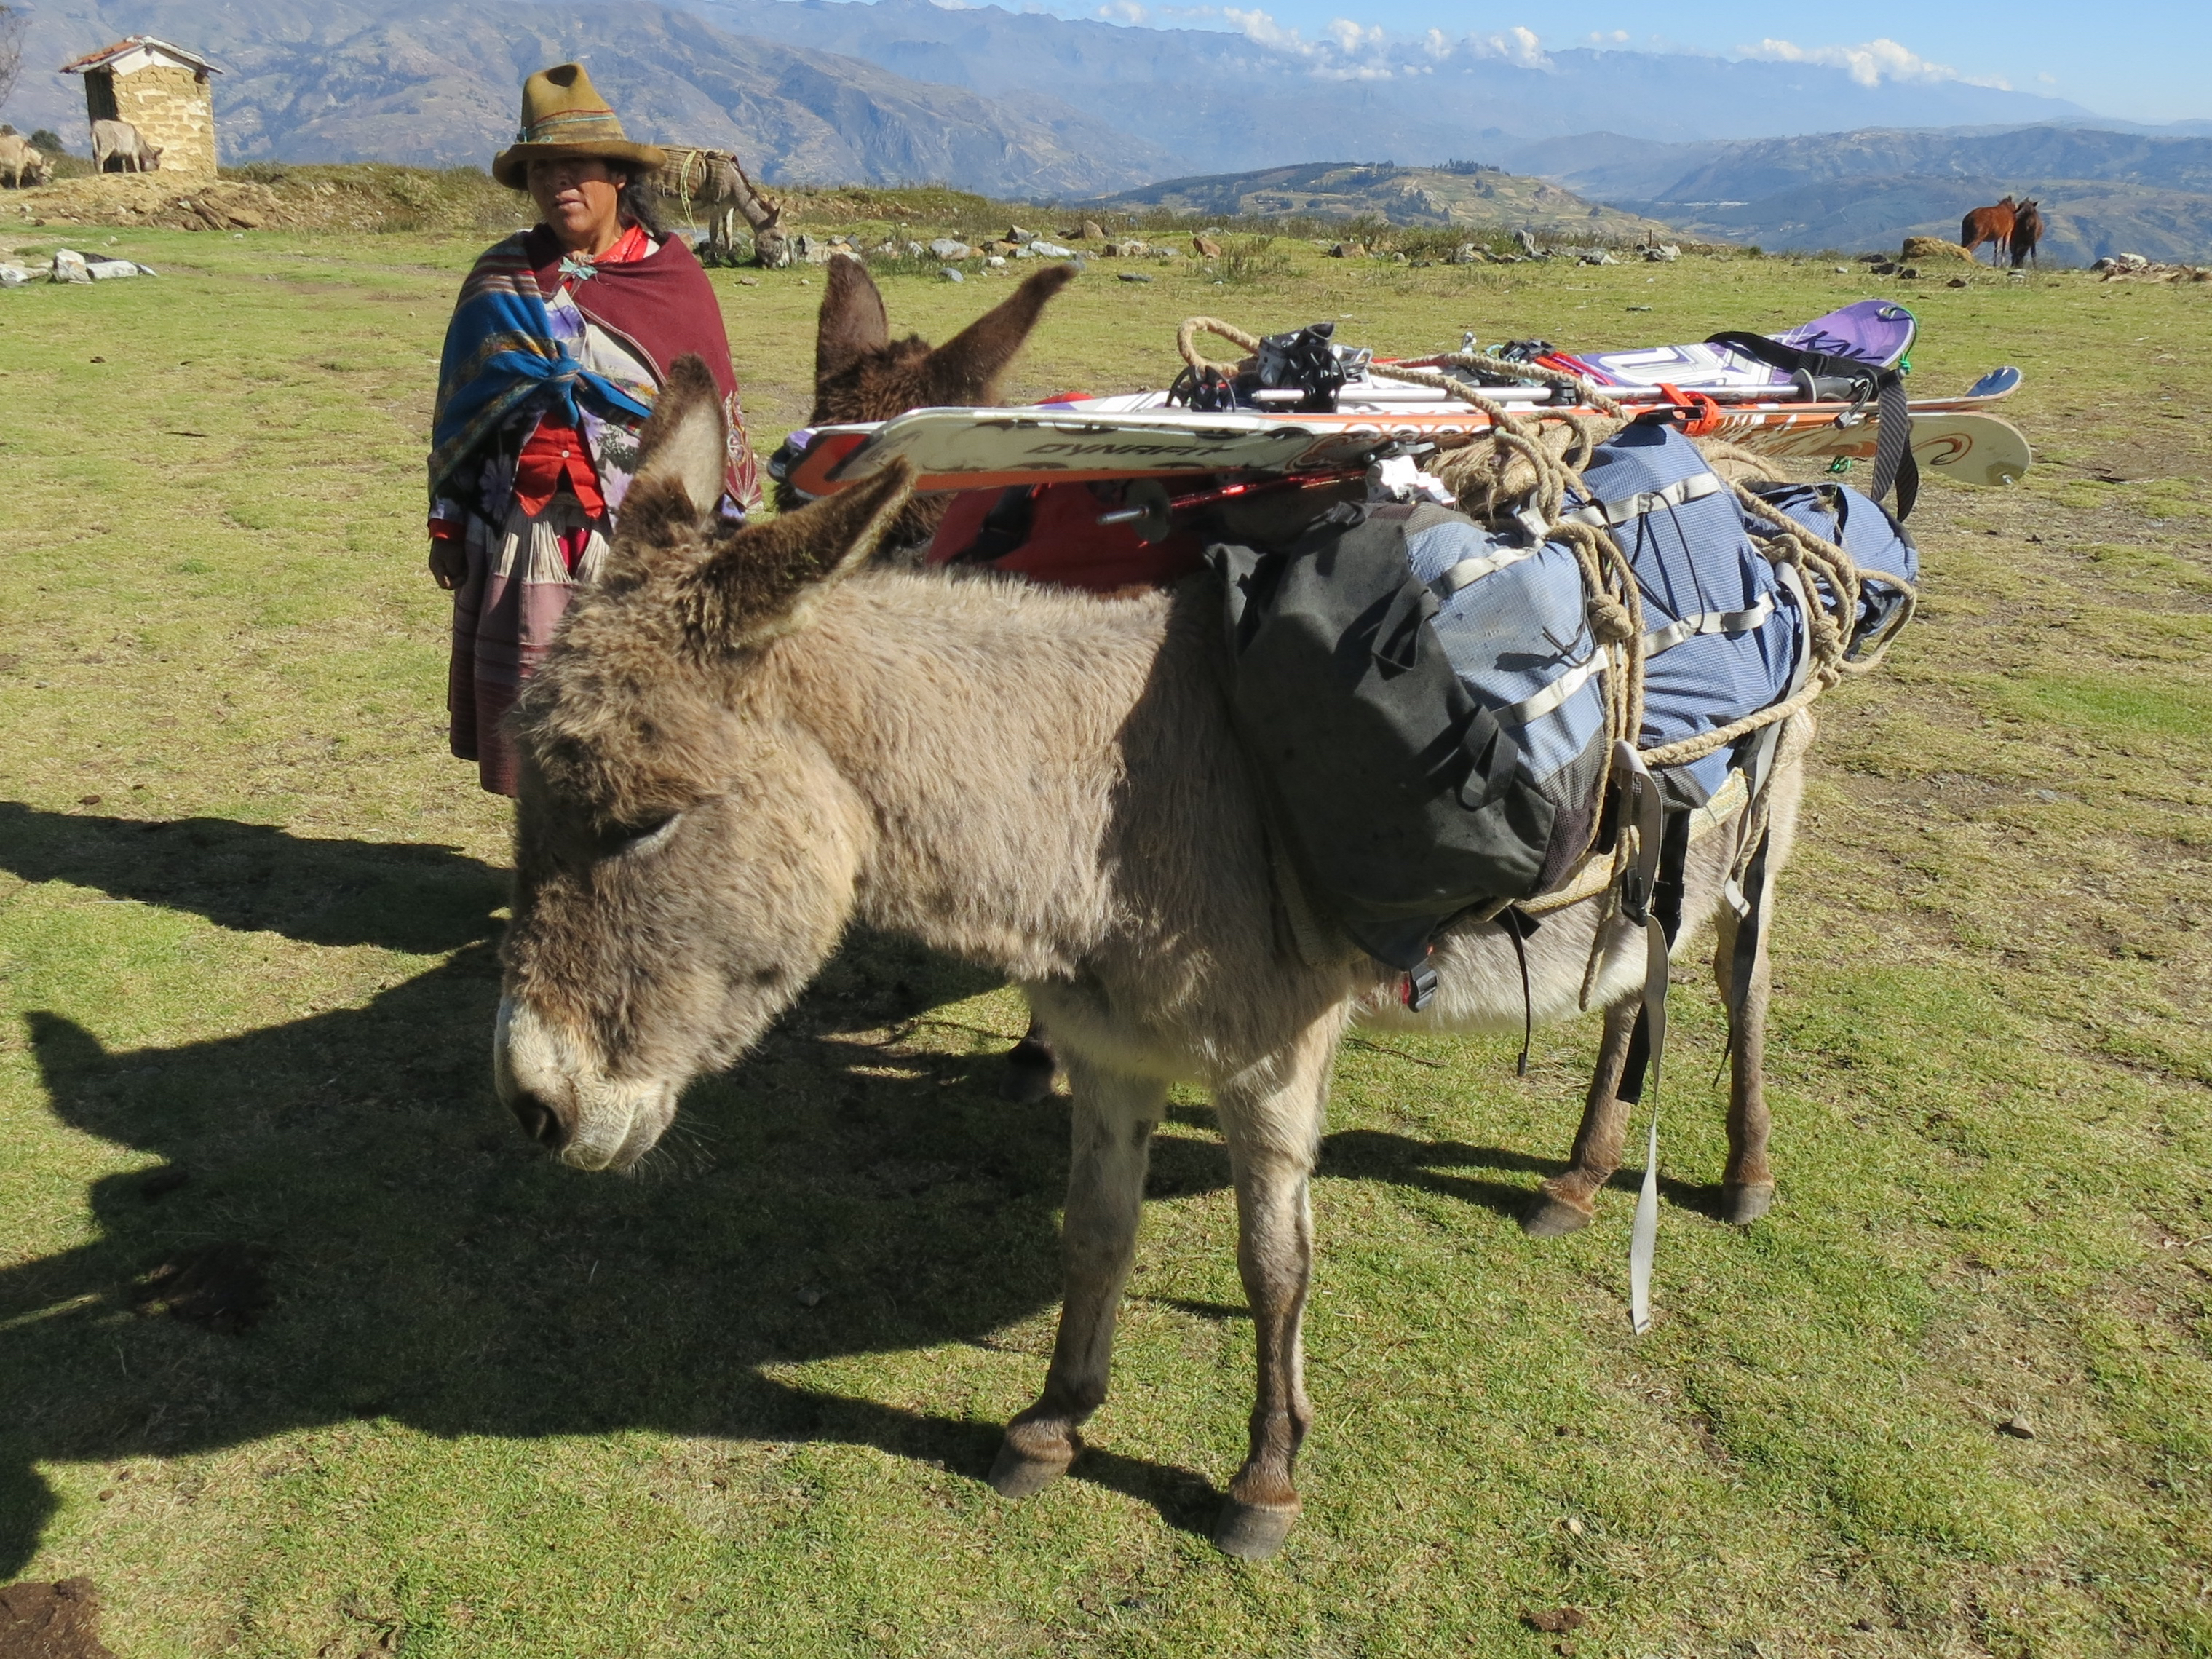 Donkeys loaded for the approach